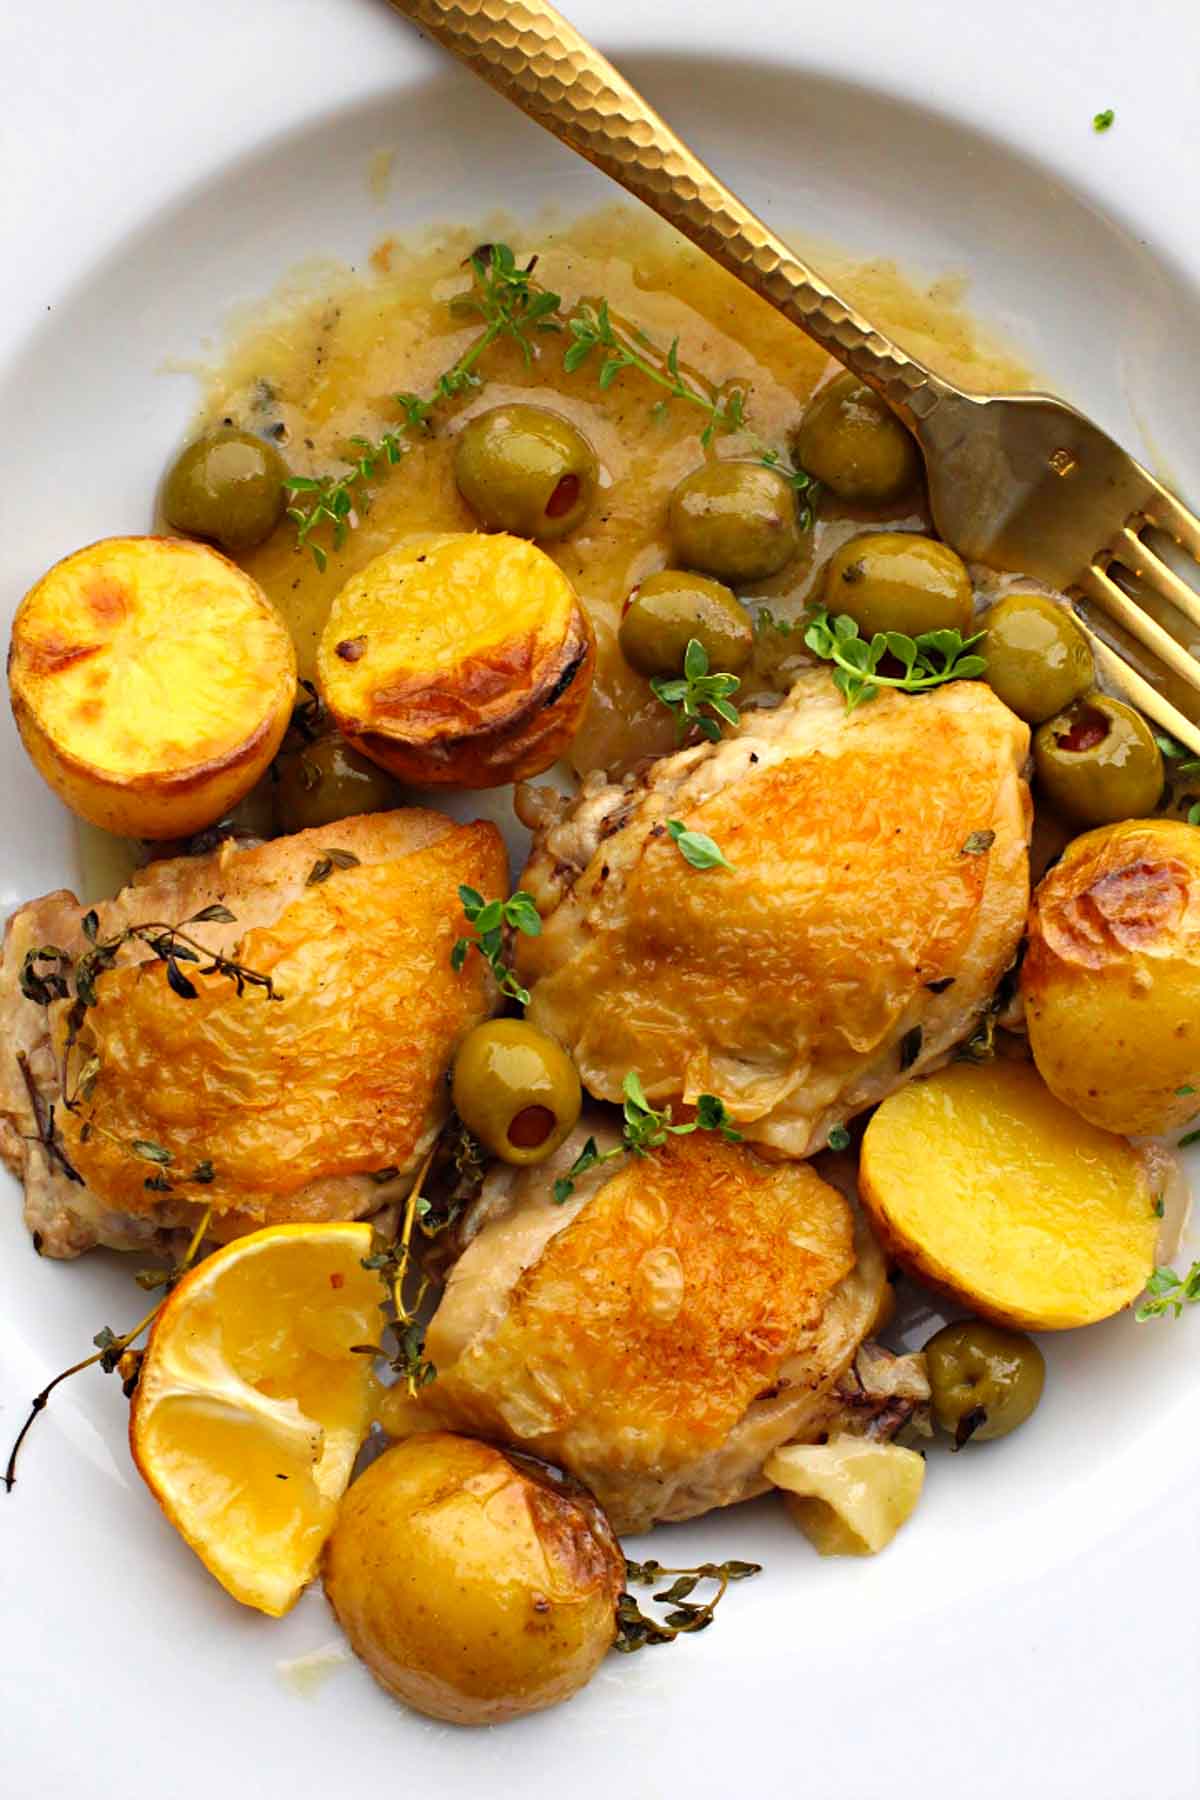 Cast iron skillet braised chicken thighs with potatoes and olives in a broth